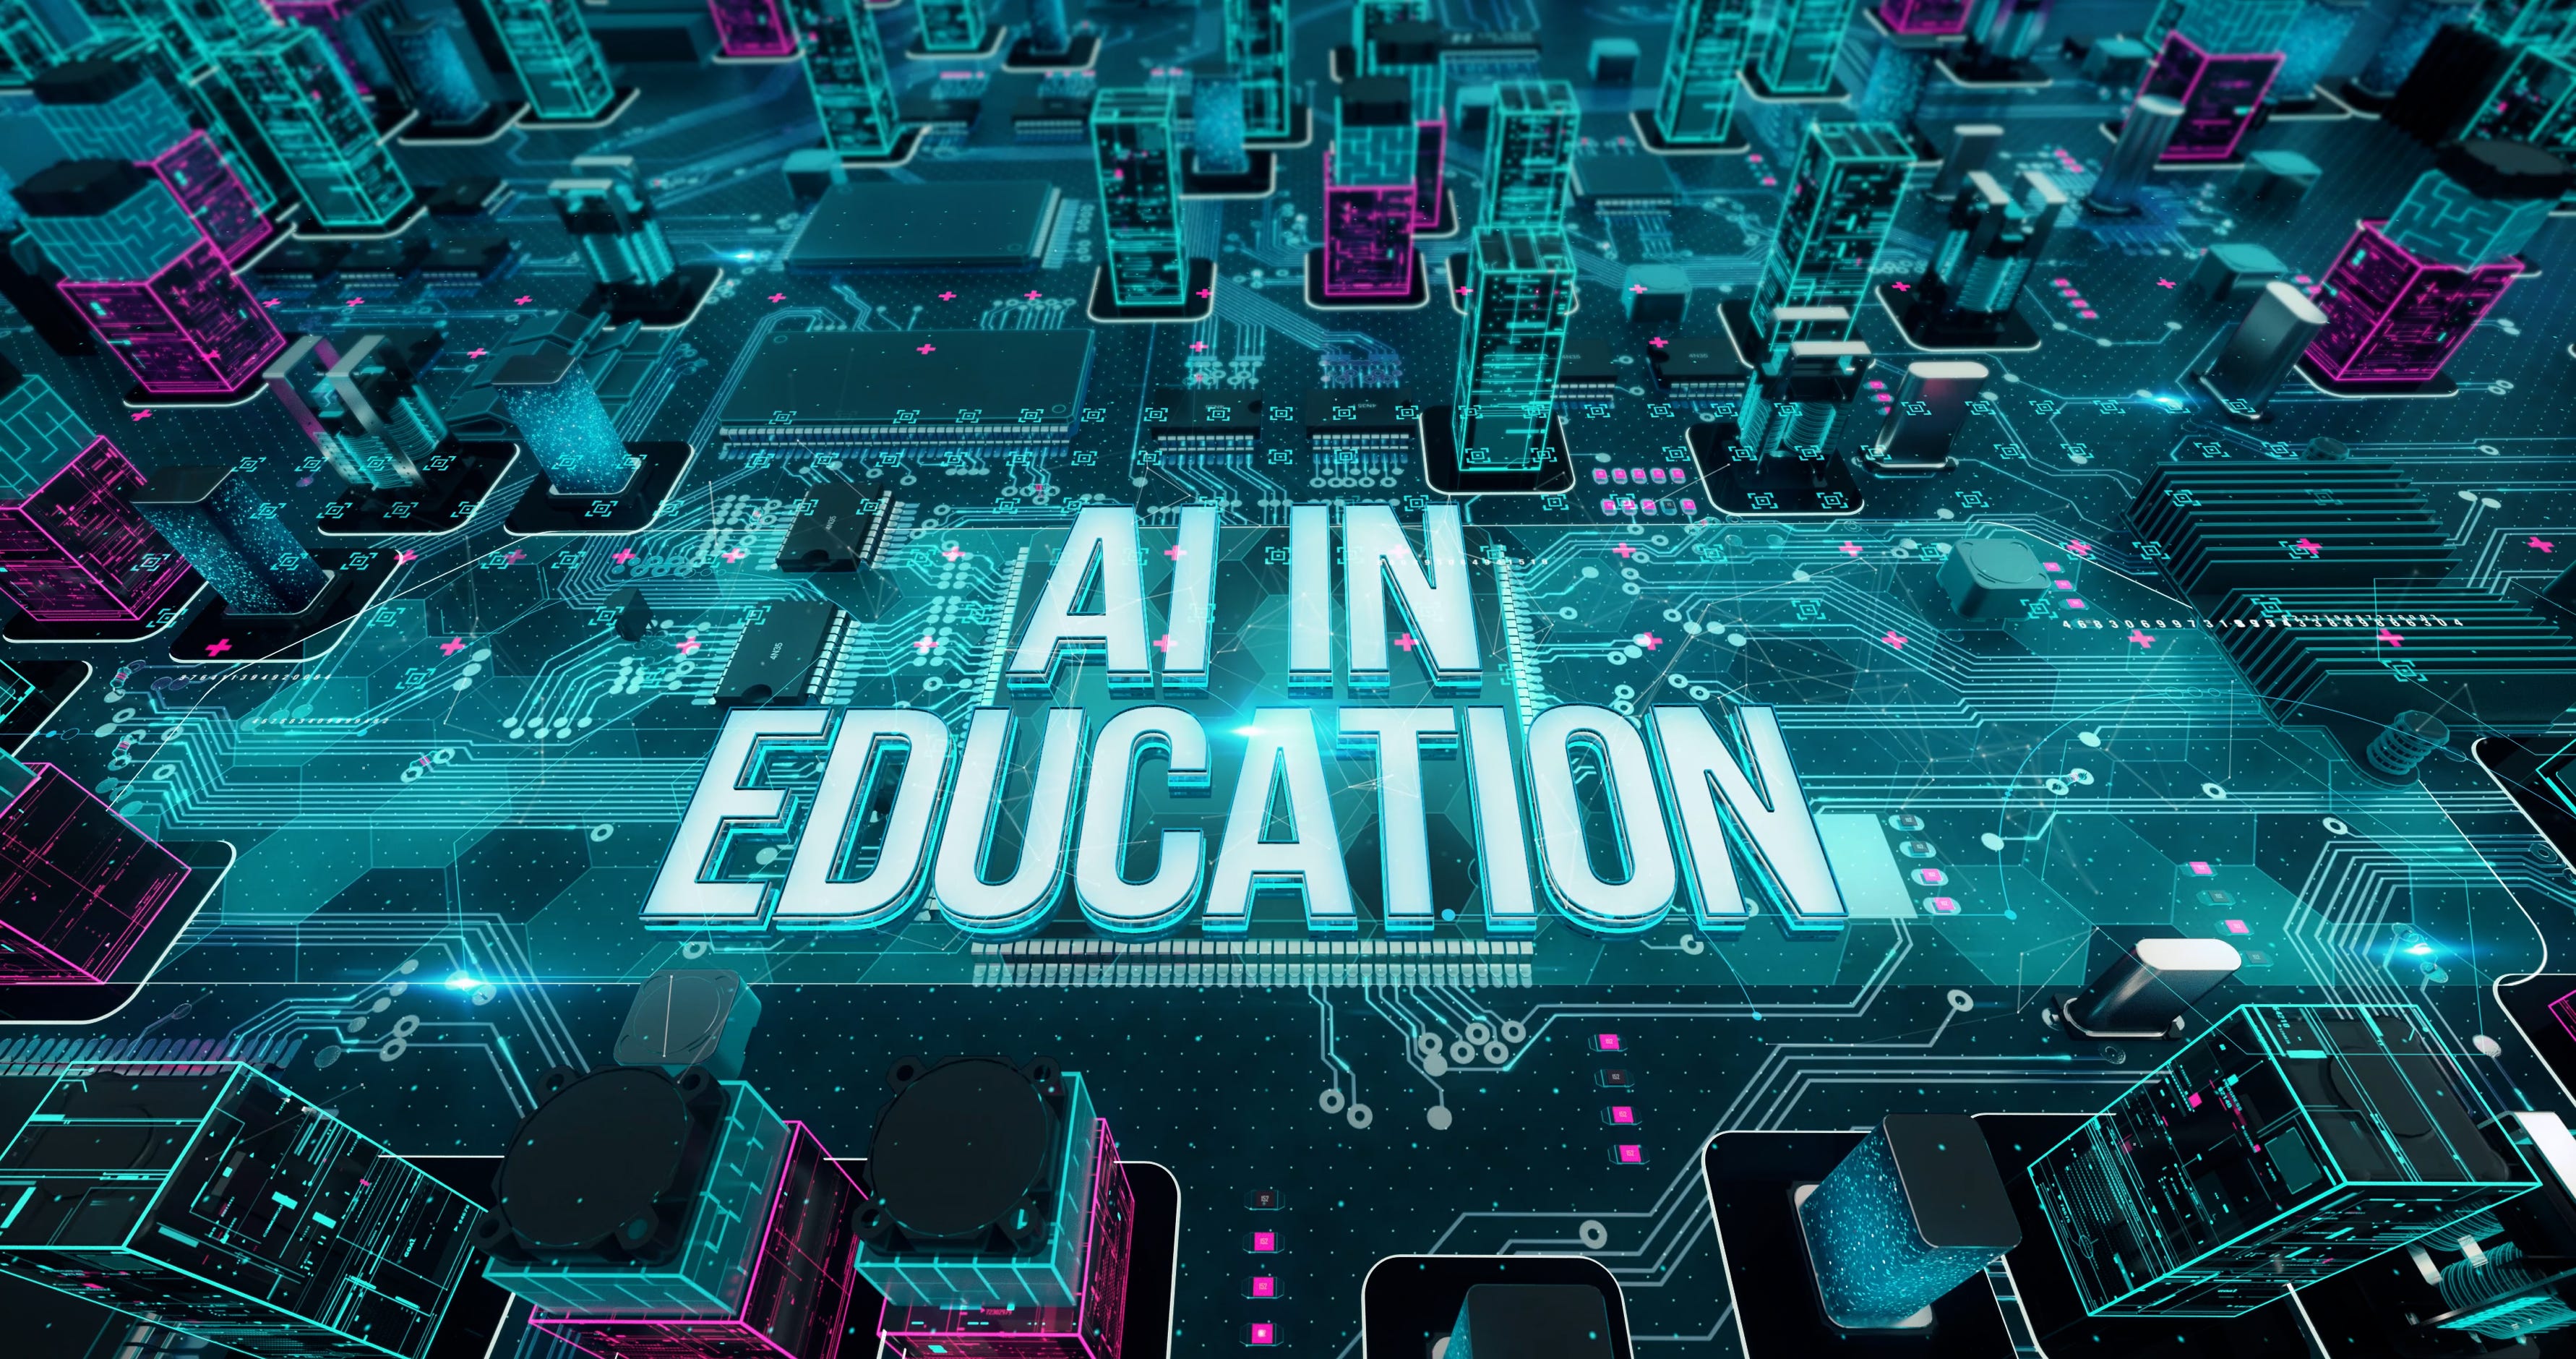 According to a recently released report by UNESCO on “Impact of AI on skill development,” AI has broad implications for the whole of humanity, including education systems that equip lifelong learners with the skills to navigate both work and society. The International Baccalaureate (IB) also emphasizes the need to adapt and transform educational programs and assessment practices to enable students to use new AI tools ethically and effectively.   At WISS, we have embarked on a transformative journey to embrace AI as a community, empowering our students to navigate an AI-integrated future in the digital age. In the context of developing ATL (Approaches to Learning) skills in students within the Diploma Programme, these are fundamental in helping students achieve their full potential. By developing these skills, students gain confidence, versatility, and resilience when approaching demanding content.   Across the Diploma program, one of the common important assessment expectations is to develop a focused research question or a knowledge question that allows for an in-depth investigation or inquiry. This involves strong research to delve into unbiased, factual information, application of justified knowledge, weighing out diverse perspectives, analyzing and evaluating them objectively and subjectively, and presenting findings in an academically acceptable manner that is devoid of plagiarism.   In my Physics classroom, students are building on research questions for their upcoming investigative analysis for their IA. One student who found it challenging to come up with an area of investigation was asked to identify his area of passion. Having identified baseball, the student was guided to use AI to get to his research question. The student gave the prompt “Google prompts to investigate experiments on baseball,” and the AI tool generated a list of areas that could be investigated experimentally. Delving further, the student could find out relevant academic papers and the citation needed with the same.    The use of AI demands a paradigm shift in the way students think, conduct research, and communicate. Furthermore, as a cohort, DP students will be learning how to create argumentative, analytical, or evaluative pieces of writing for TOK and other subject areas using AI and, at the same time, generate academically honest work by citing work generated by AI as per IB guidelines.    It’s important to note that while AI platforms offer unique benefits, they should not replace human interaction in research or skill development. Embracing our humanity and learning to connect human-to-human remains crucial for personal and professional advancement. As a community at WISS, we would continue embracing innovative methods of teaching and learning that empower our students to be creators and not imitators in ways that would ignite their passion and sense of inquiry.  